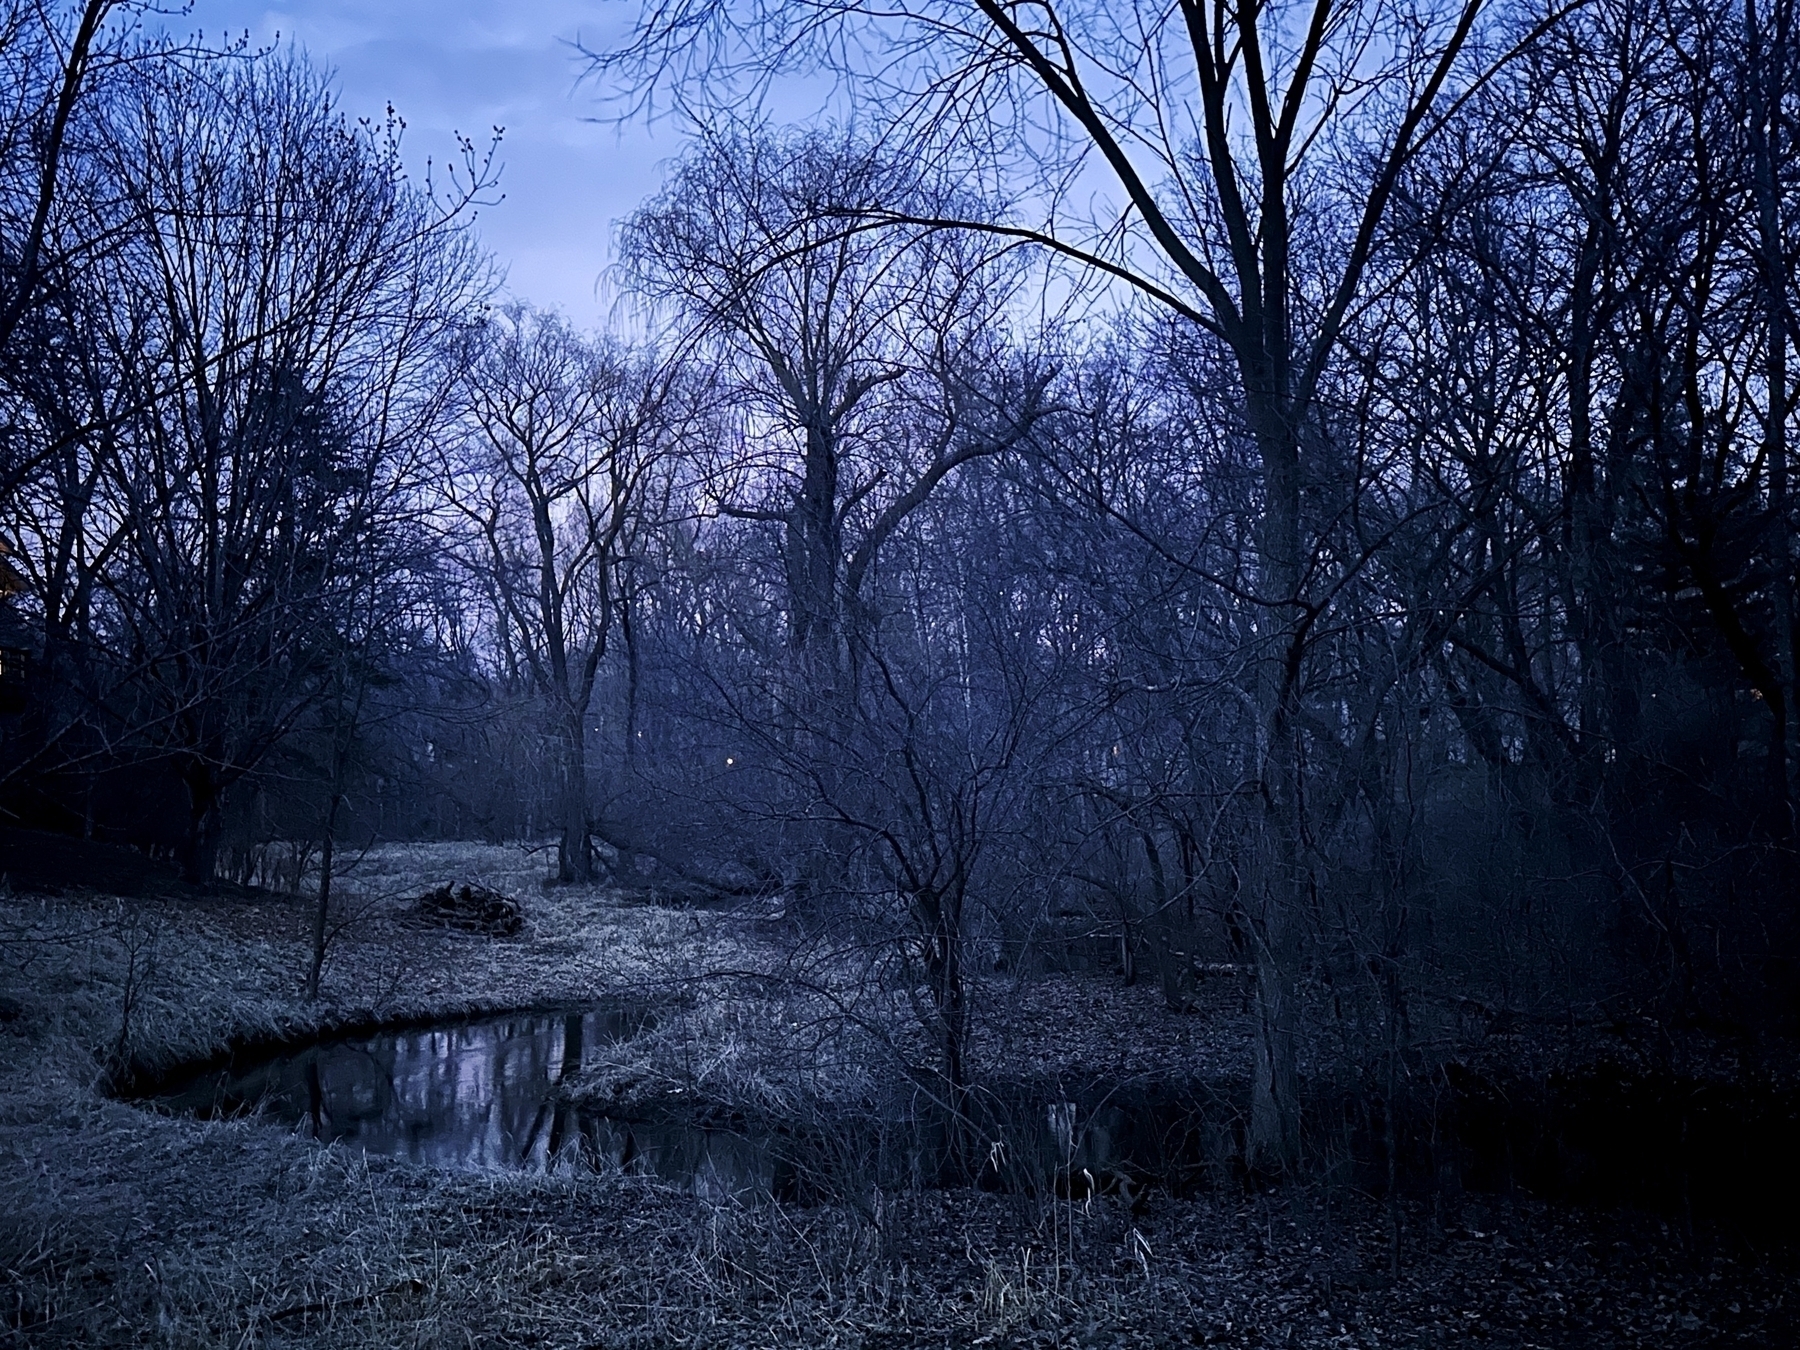 Barren trees surround a still creek at twilight, creating a serene yet eerie atmosphere.